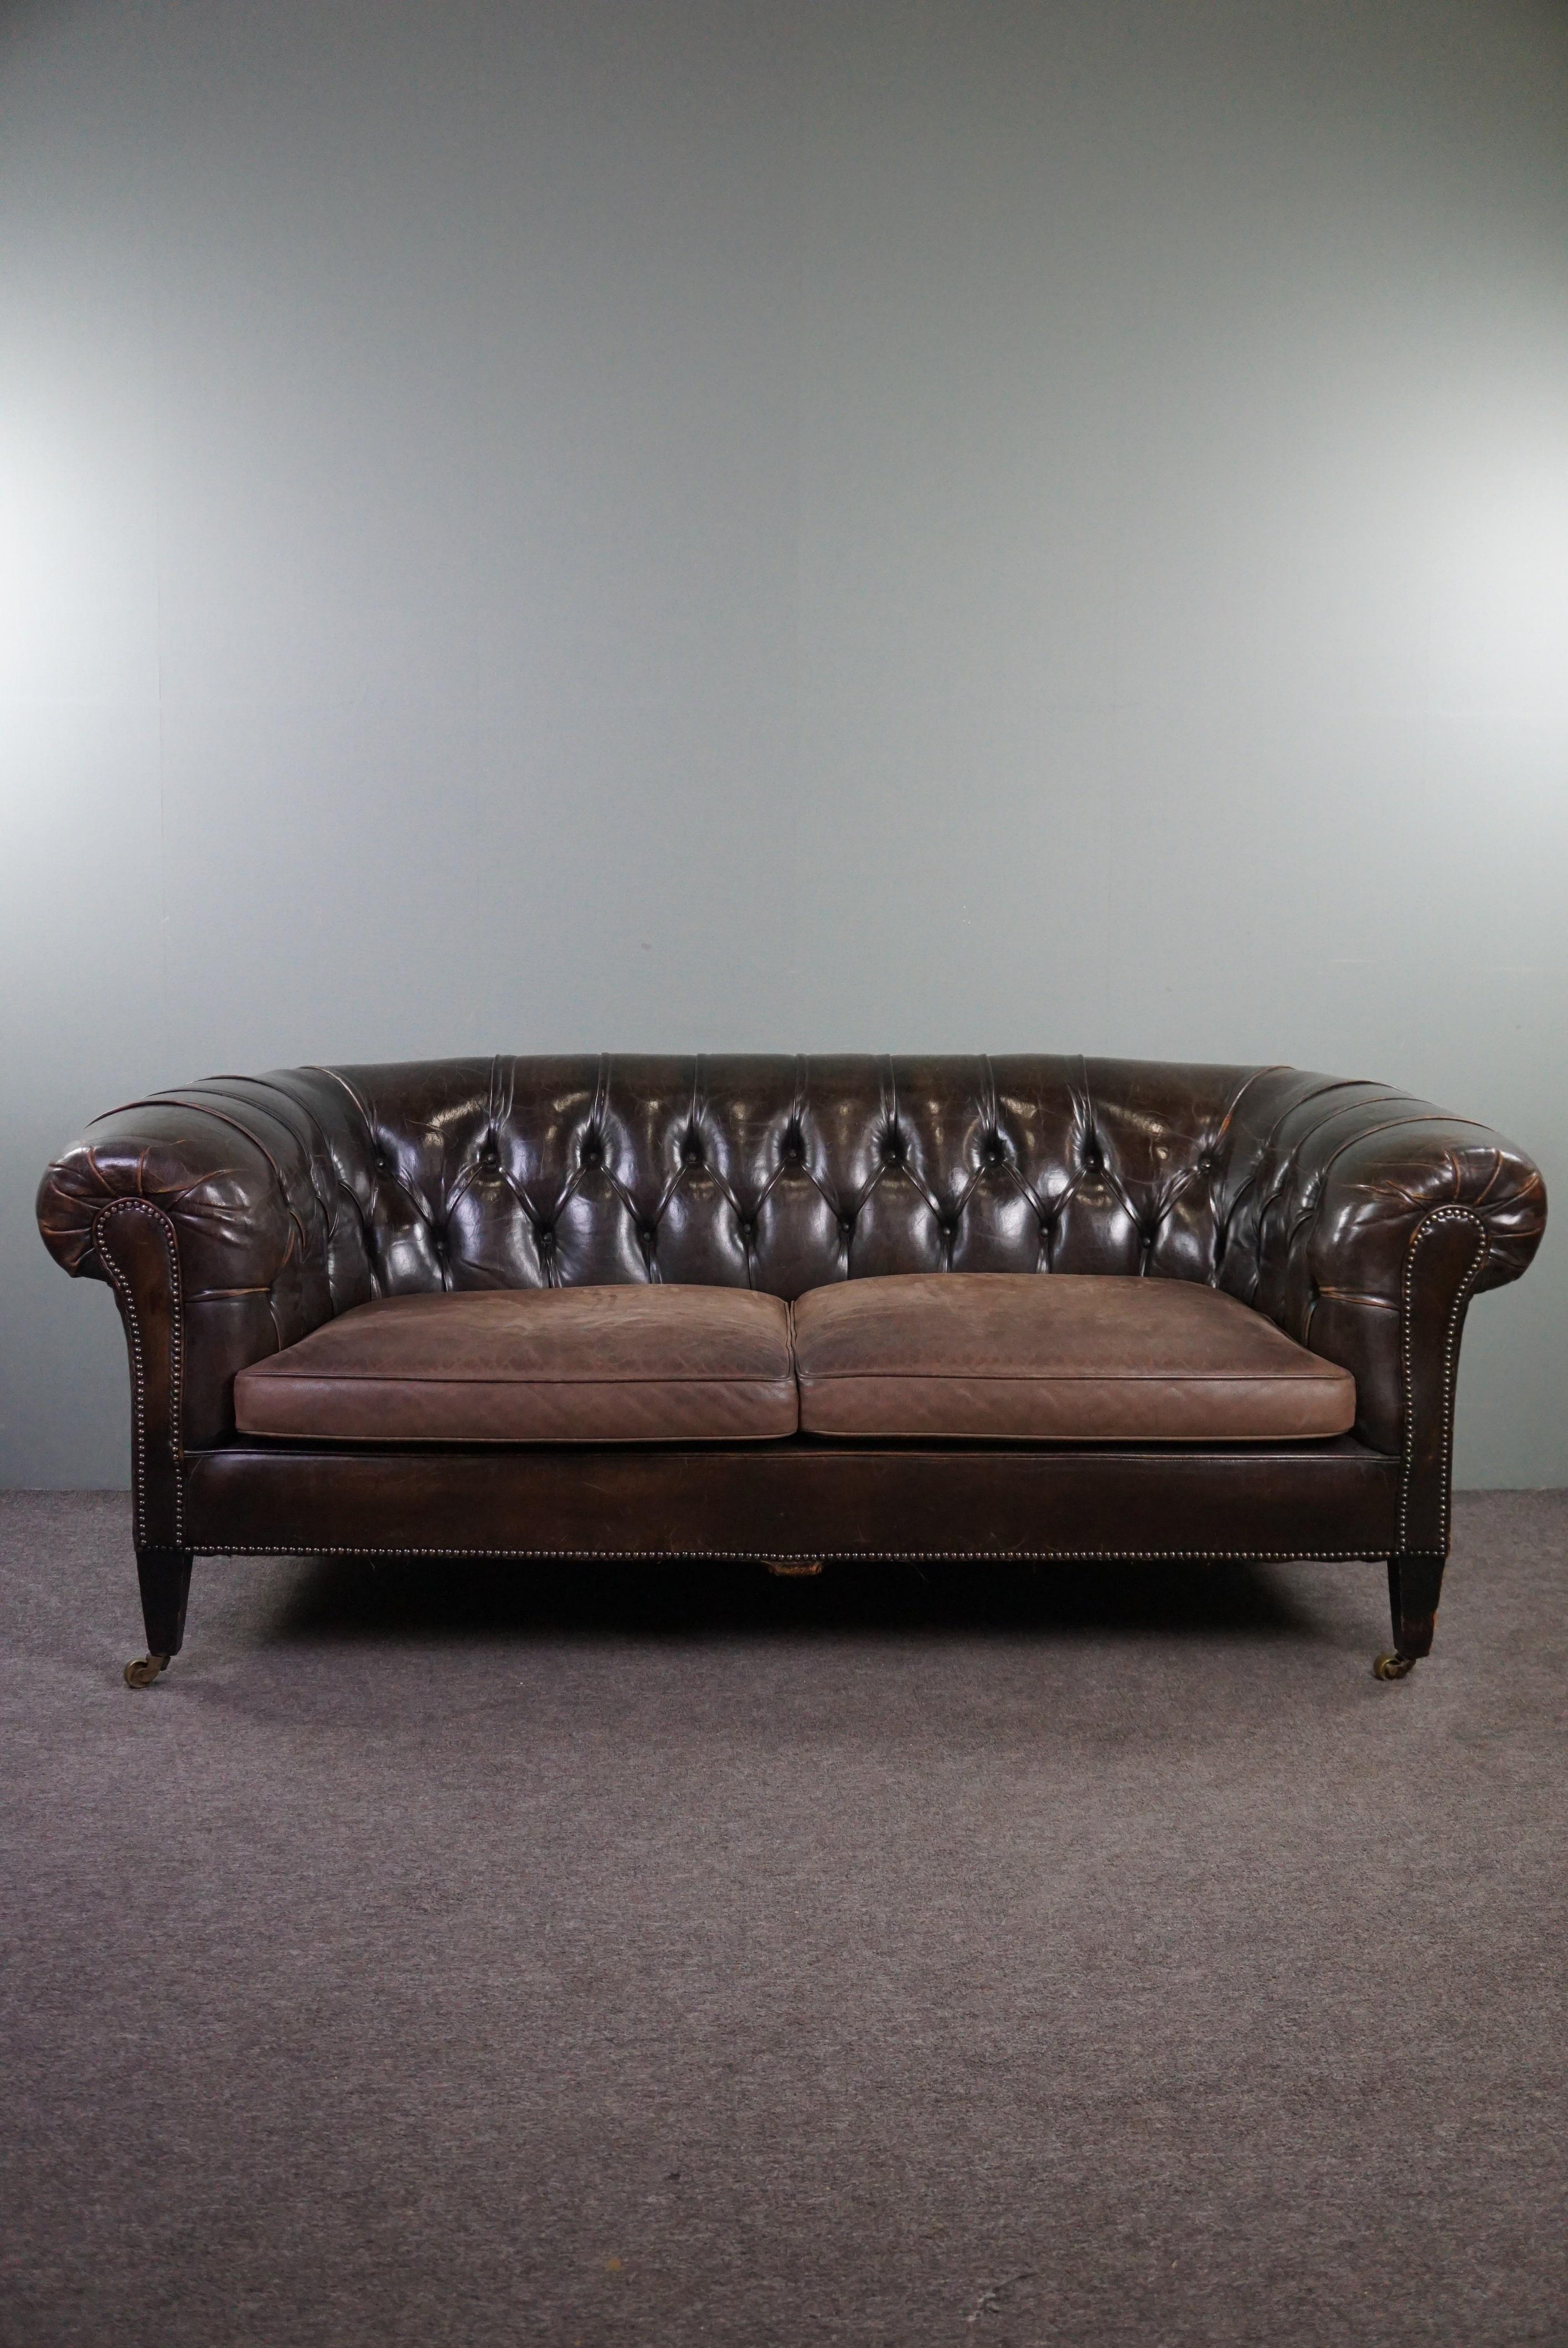 
With pride we offer you this wonderfully comfortable patinated antique 2.5-seater Chesterfield sofa in stunning condition due to its patina.

This Chesterfield sofa features a beautiful tufted seat, a rich deep color, and stands on slender wooden